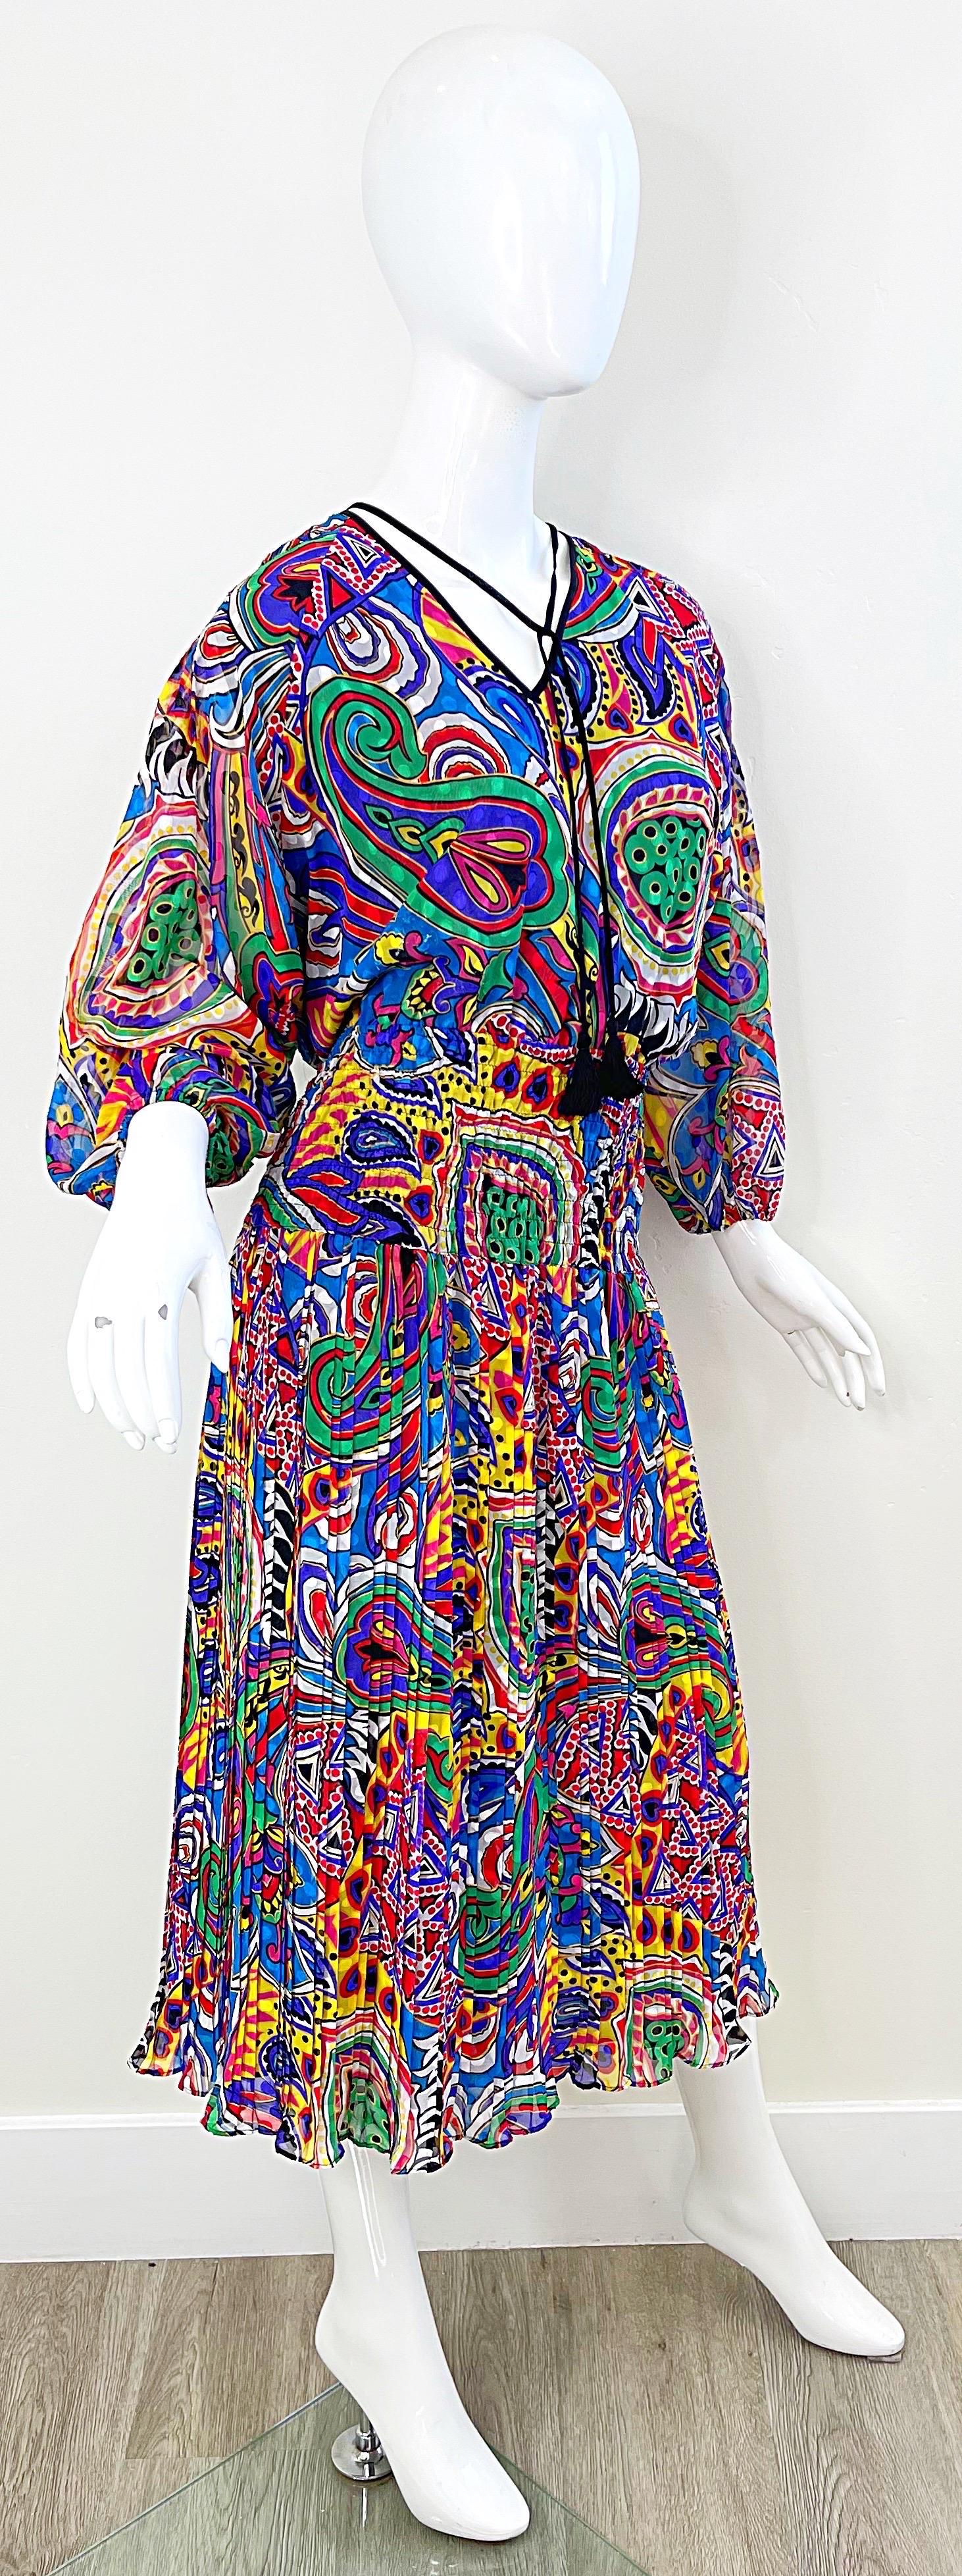 Diane Freis 1980s Novelty Heart Paisley Psychedelic Print Vintage 80s Dress For Sale 3